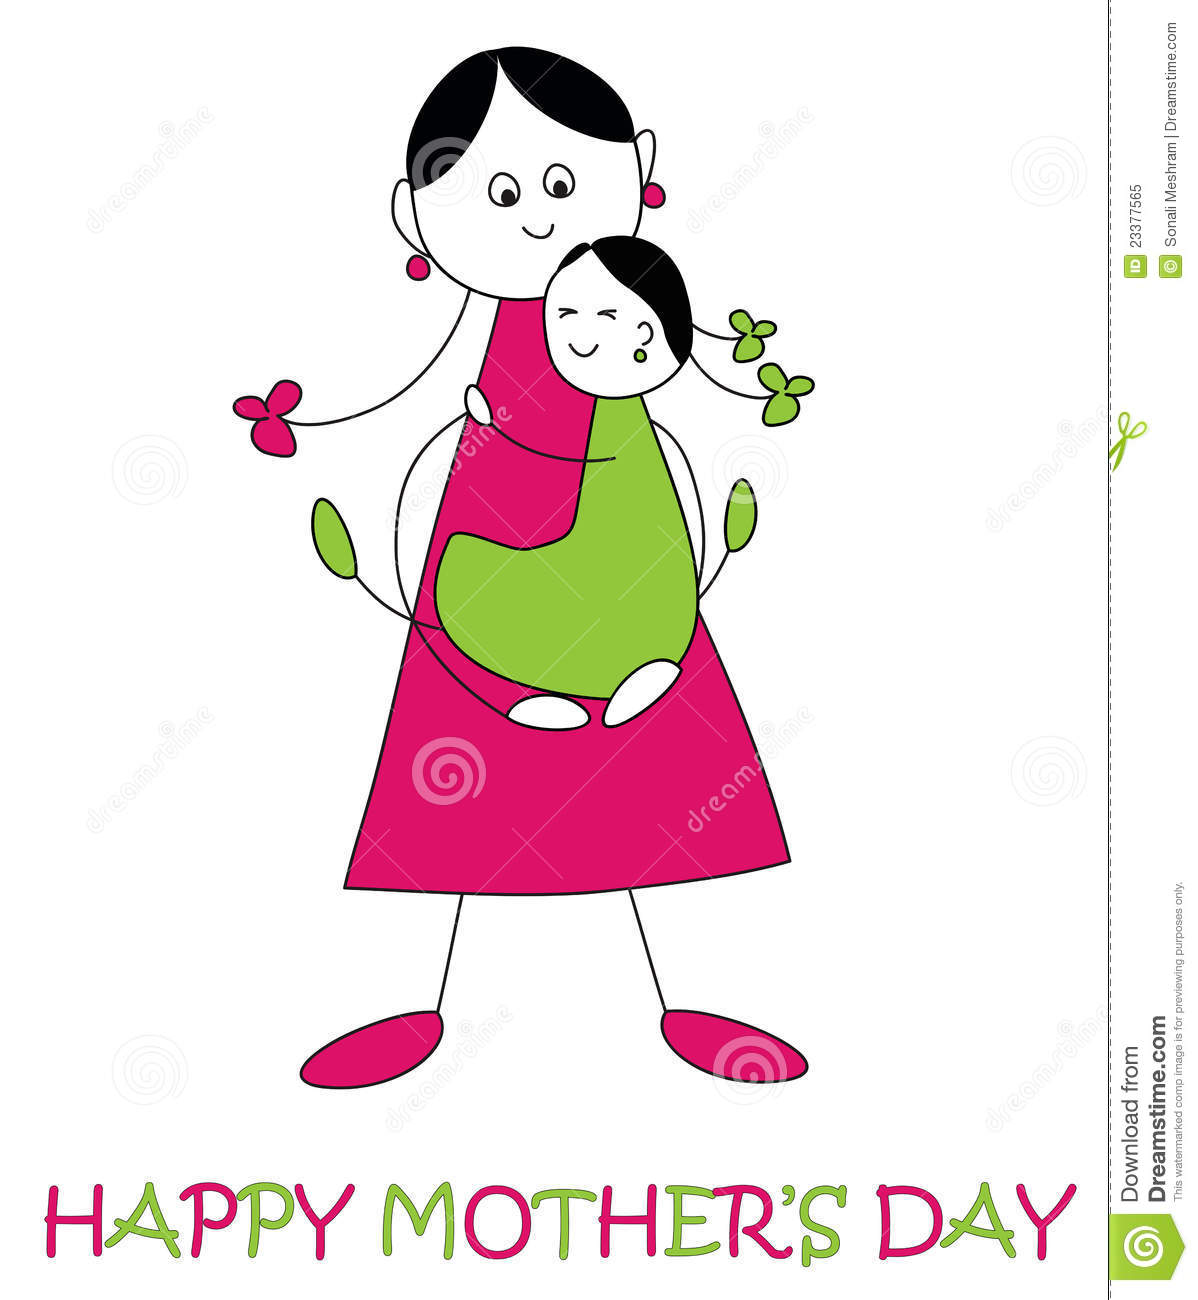 Clipart Mothers Day Mother S Day Clip Art 23377565 Jpg